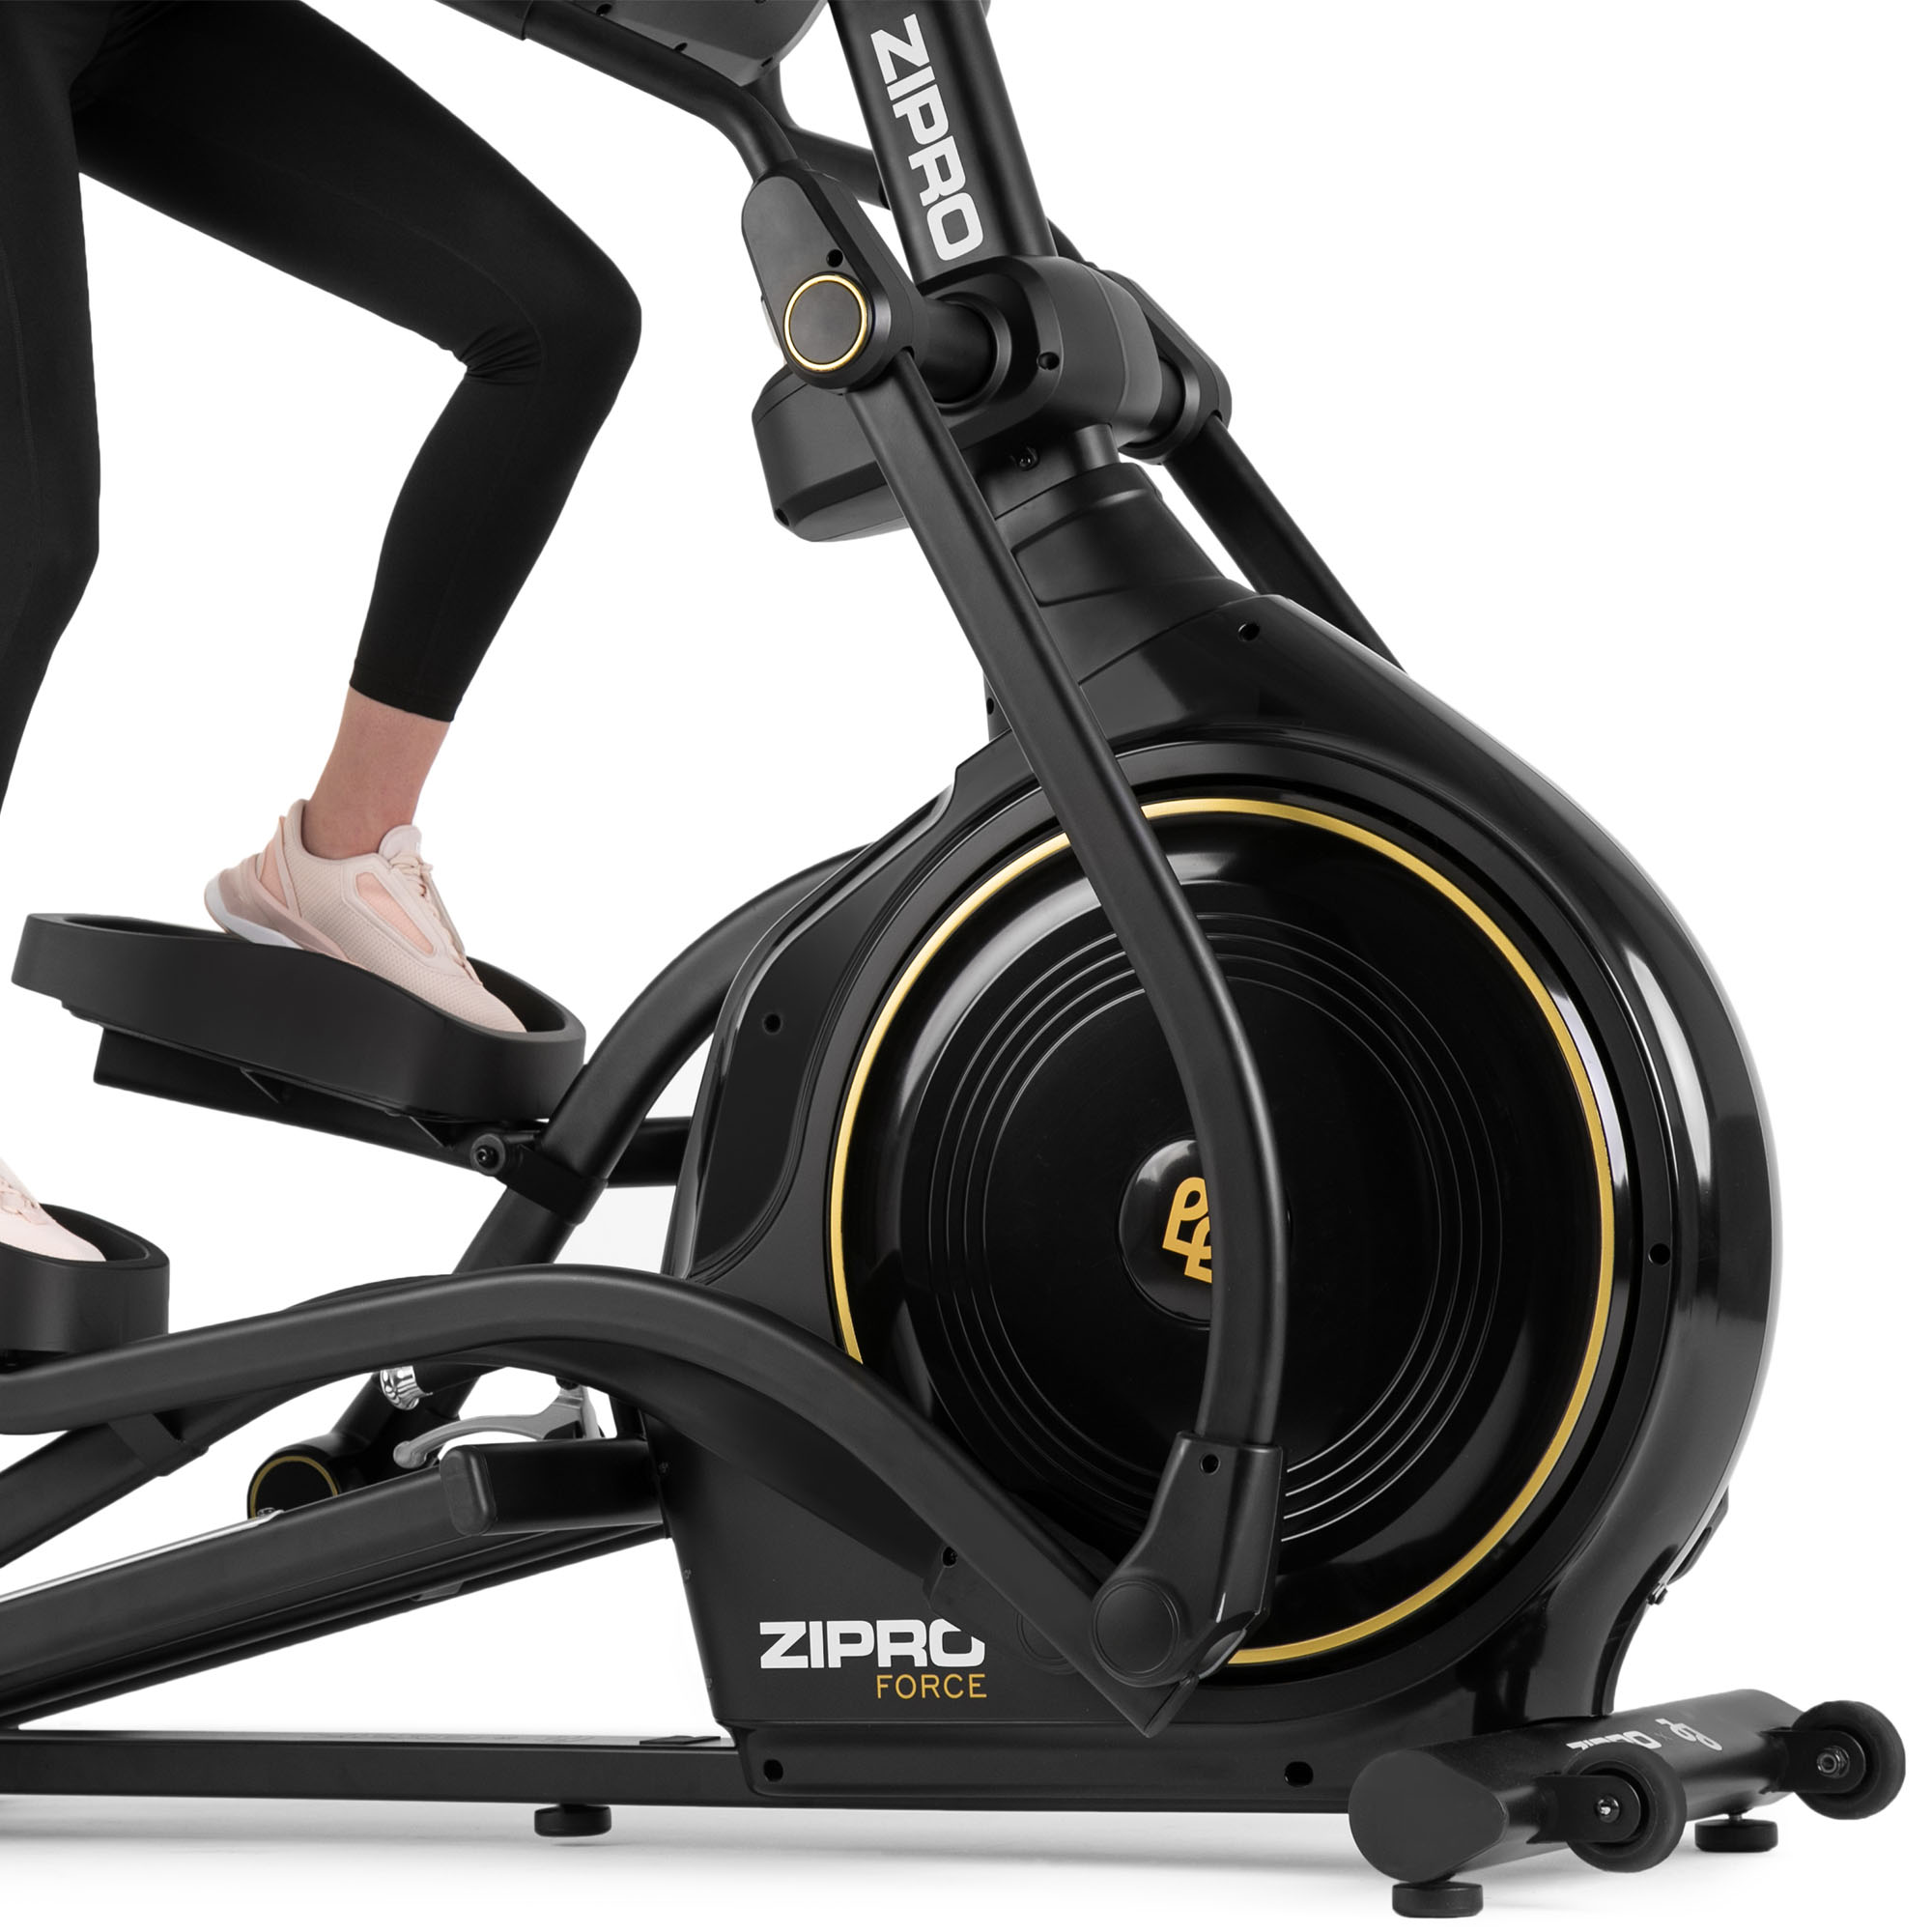 ZIPRO Force Gold iConsole+ Crosstrainer, Schawrz